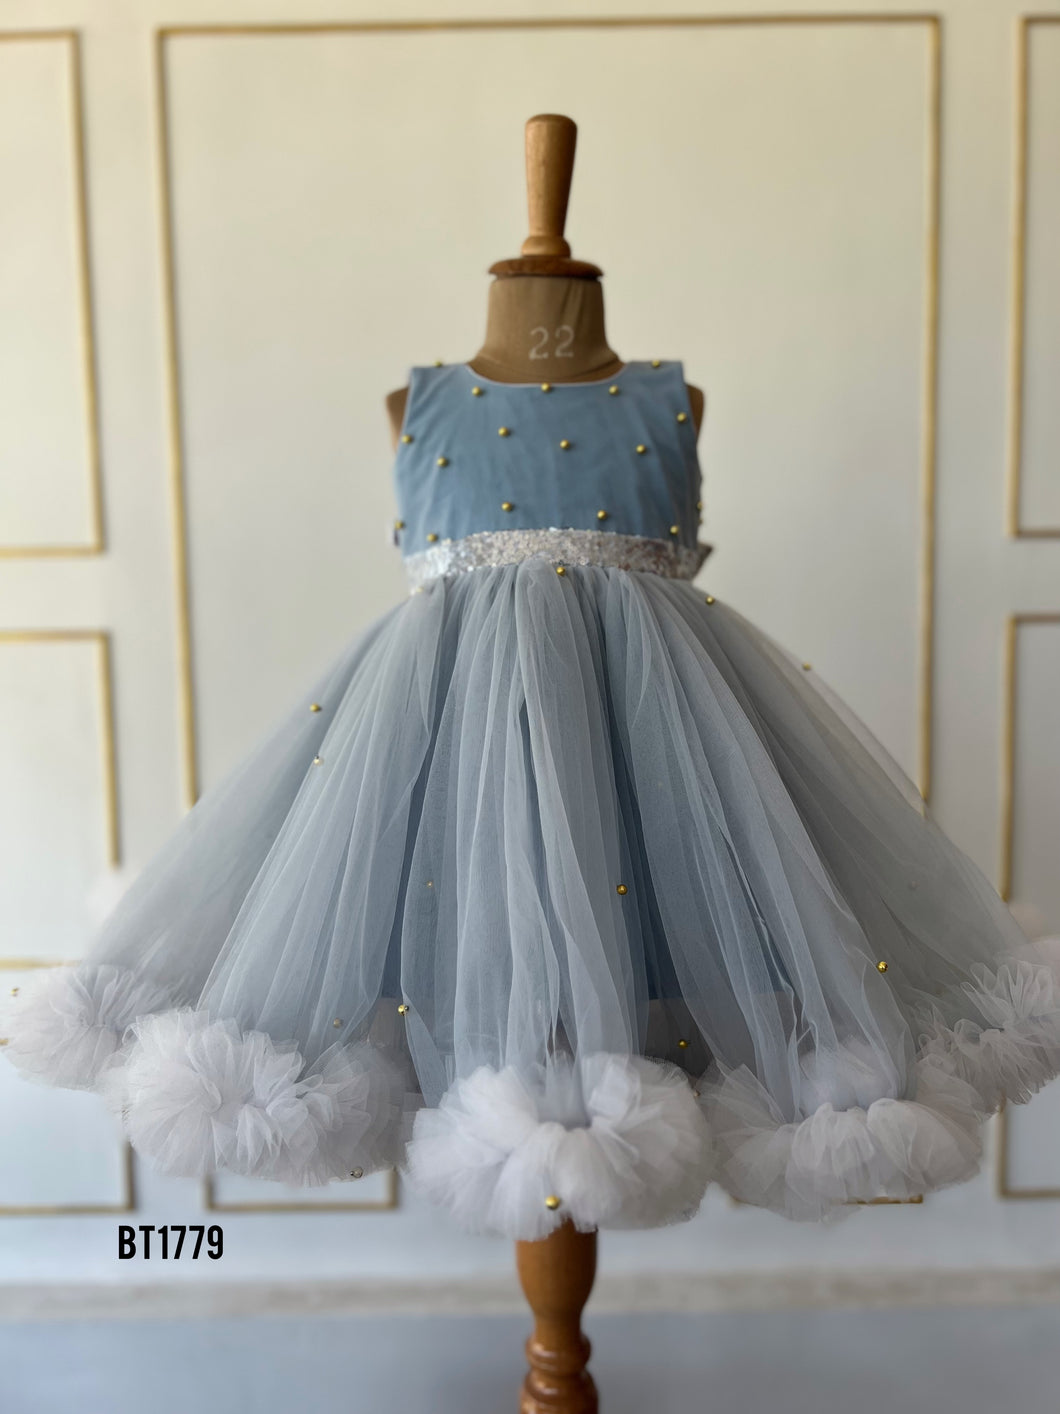 BT1779 Starry Skyline Dress – A Whisk of Clouds and Stars for Your Little One!